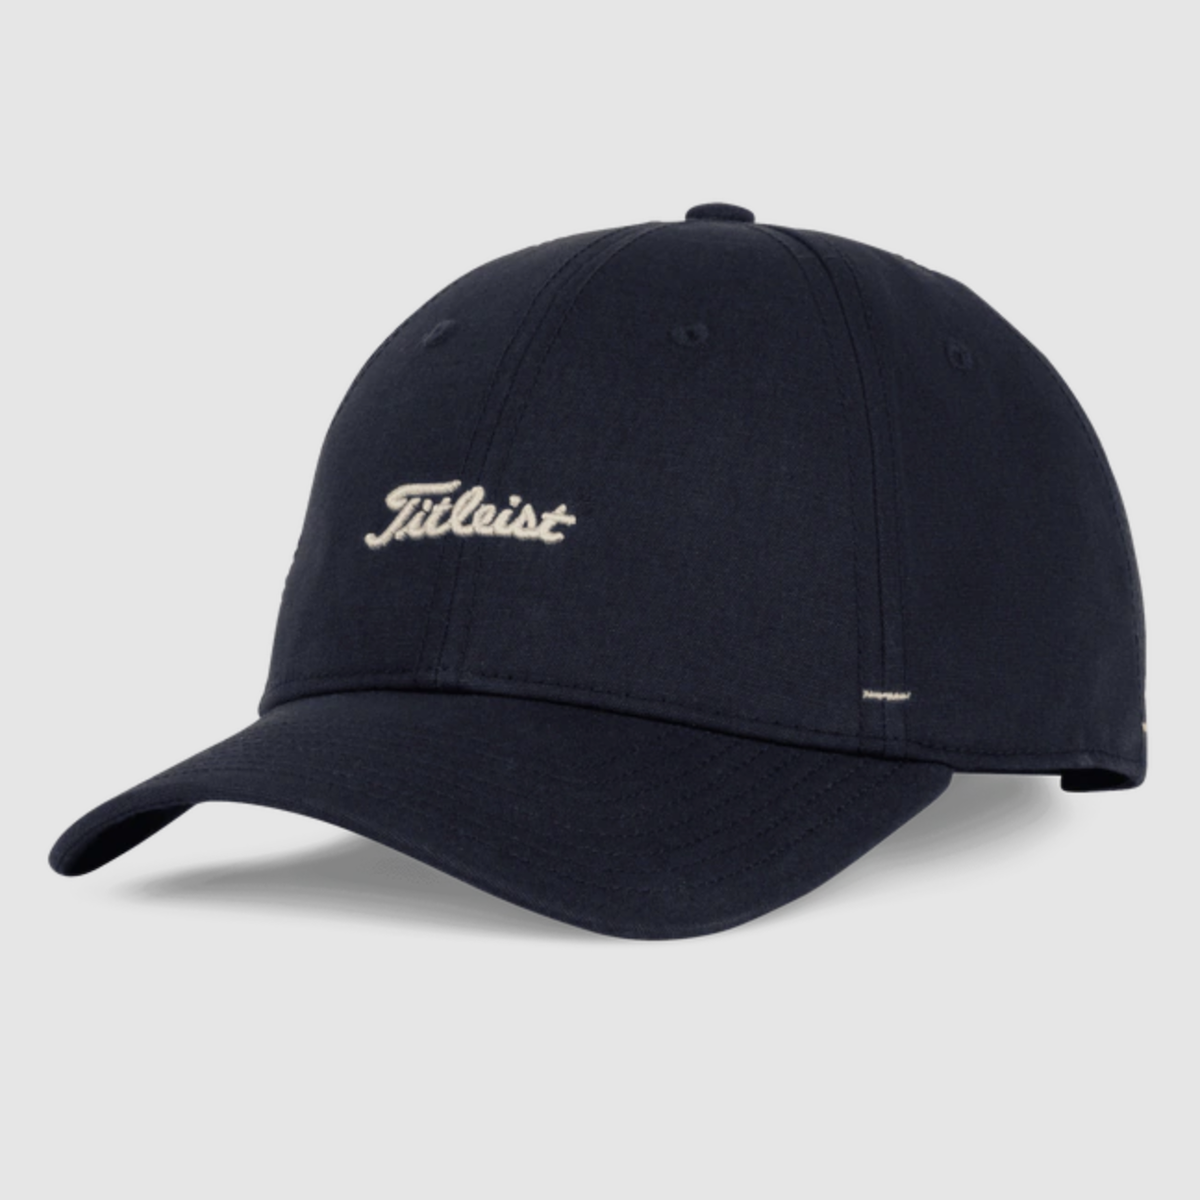 Titleist leather and canvas hat